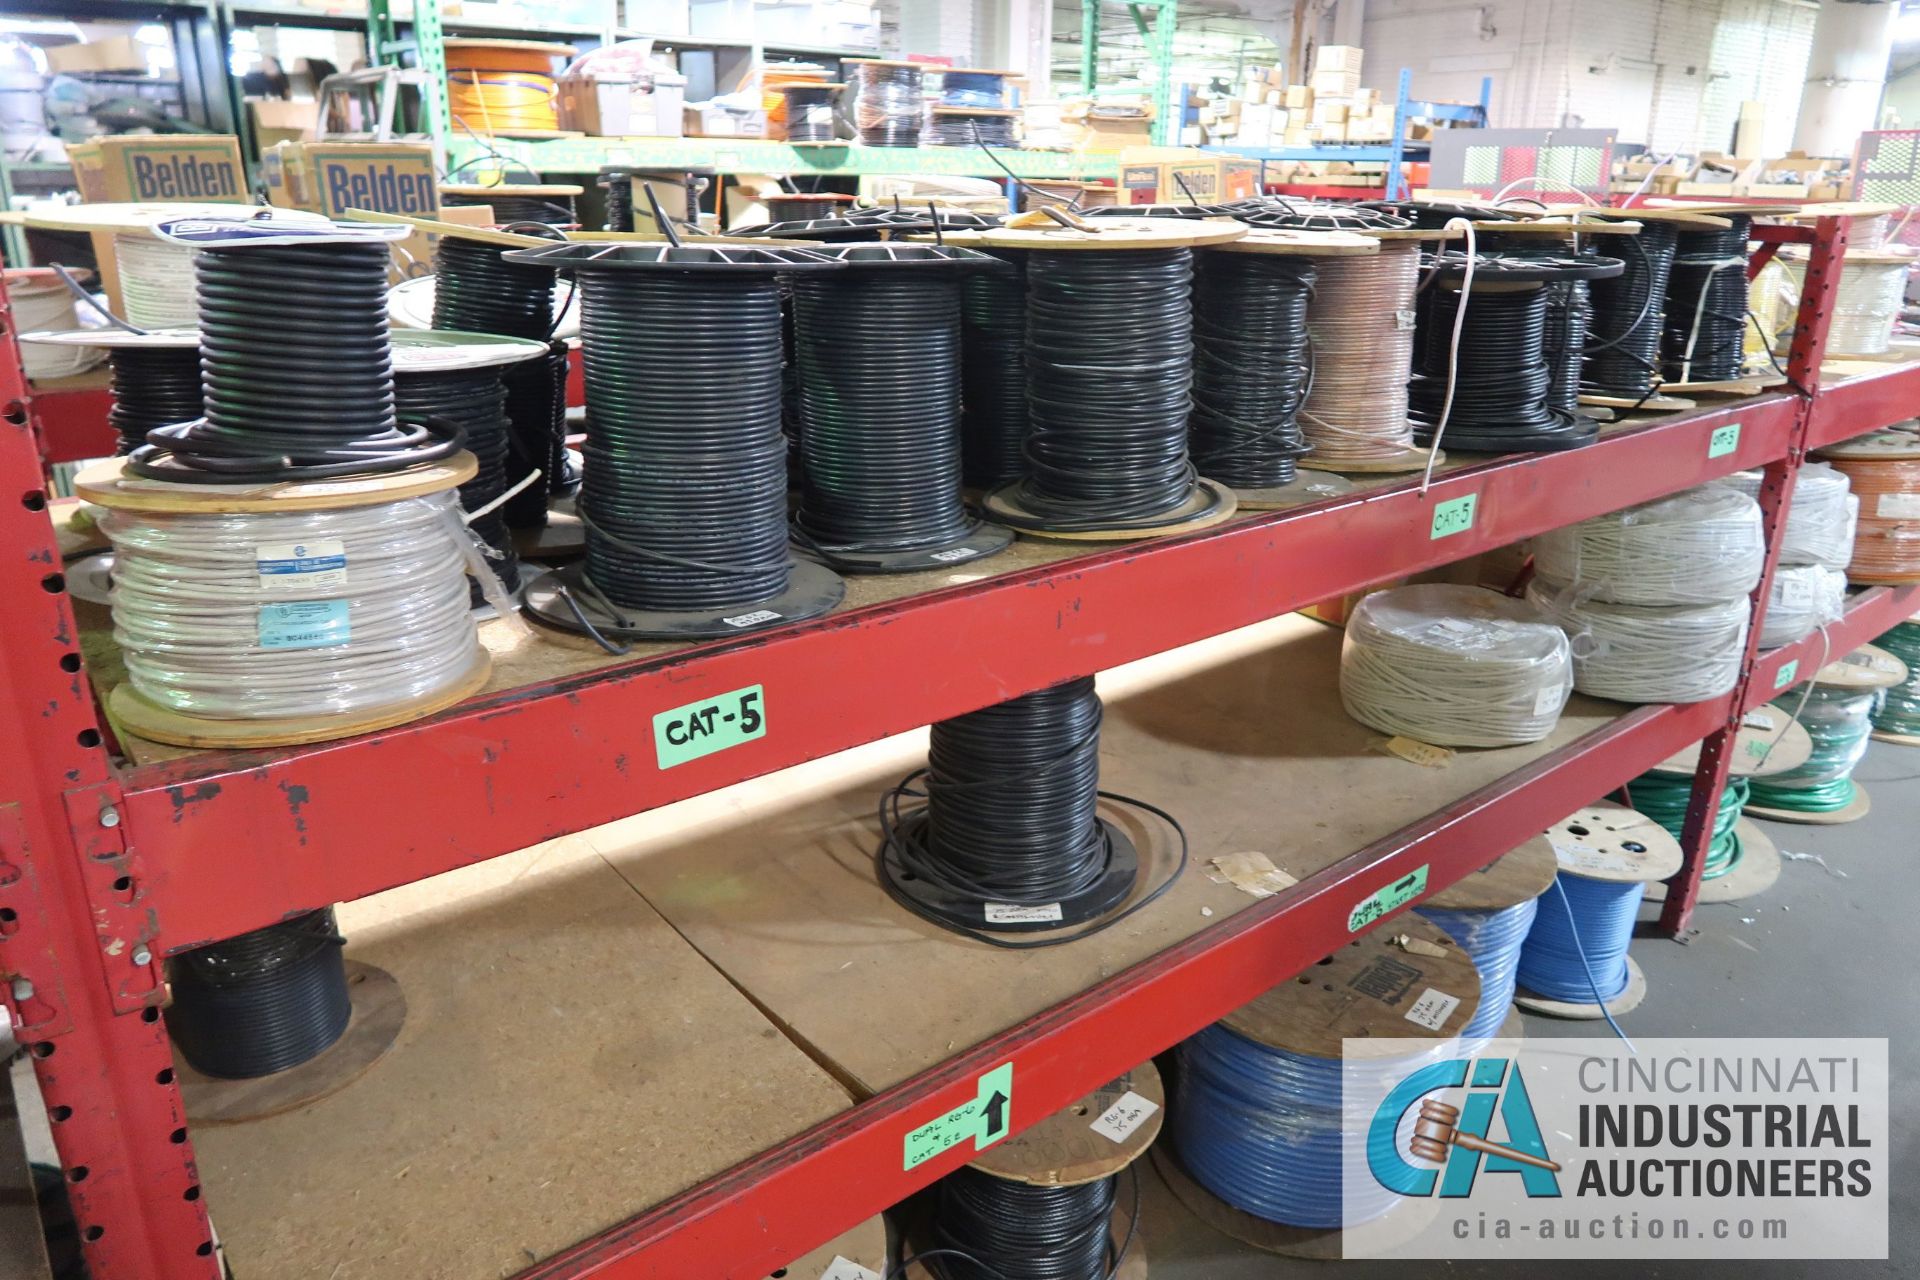 (LOT) LARGE QUANTITY OF COAX CABLE ON (3) SECTIONS RED RACK - APPROX. (130) SPOOLS - SOLD BY THE - Image 8 of 14